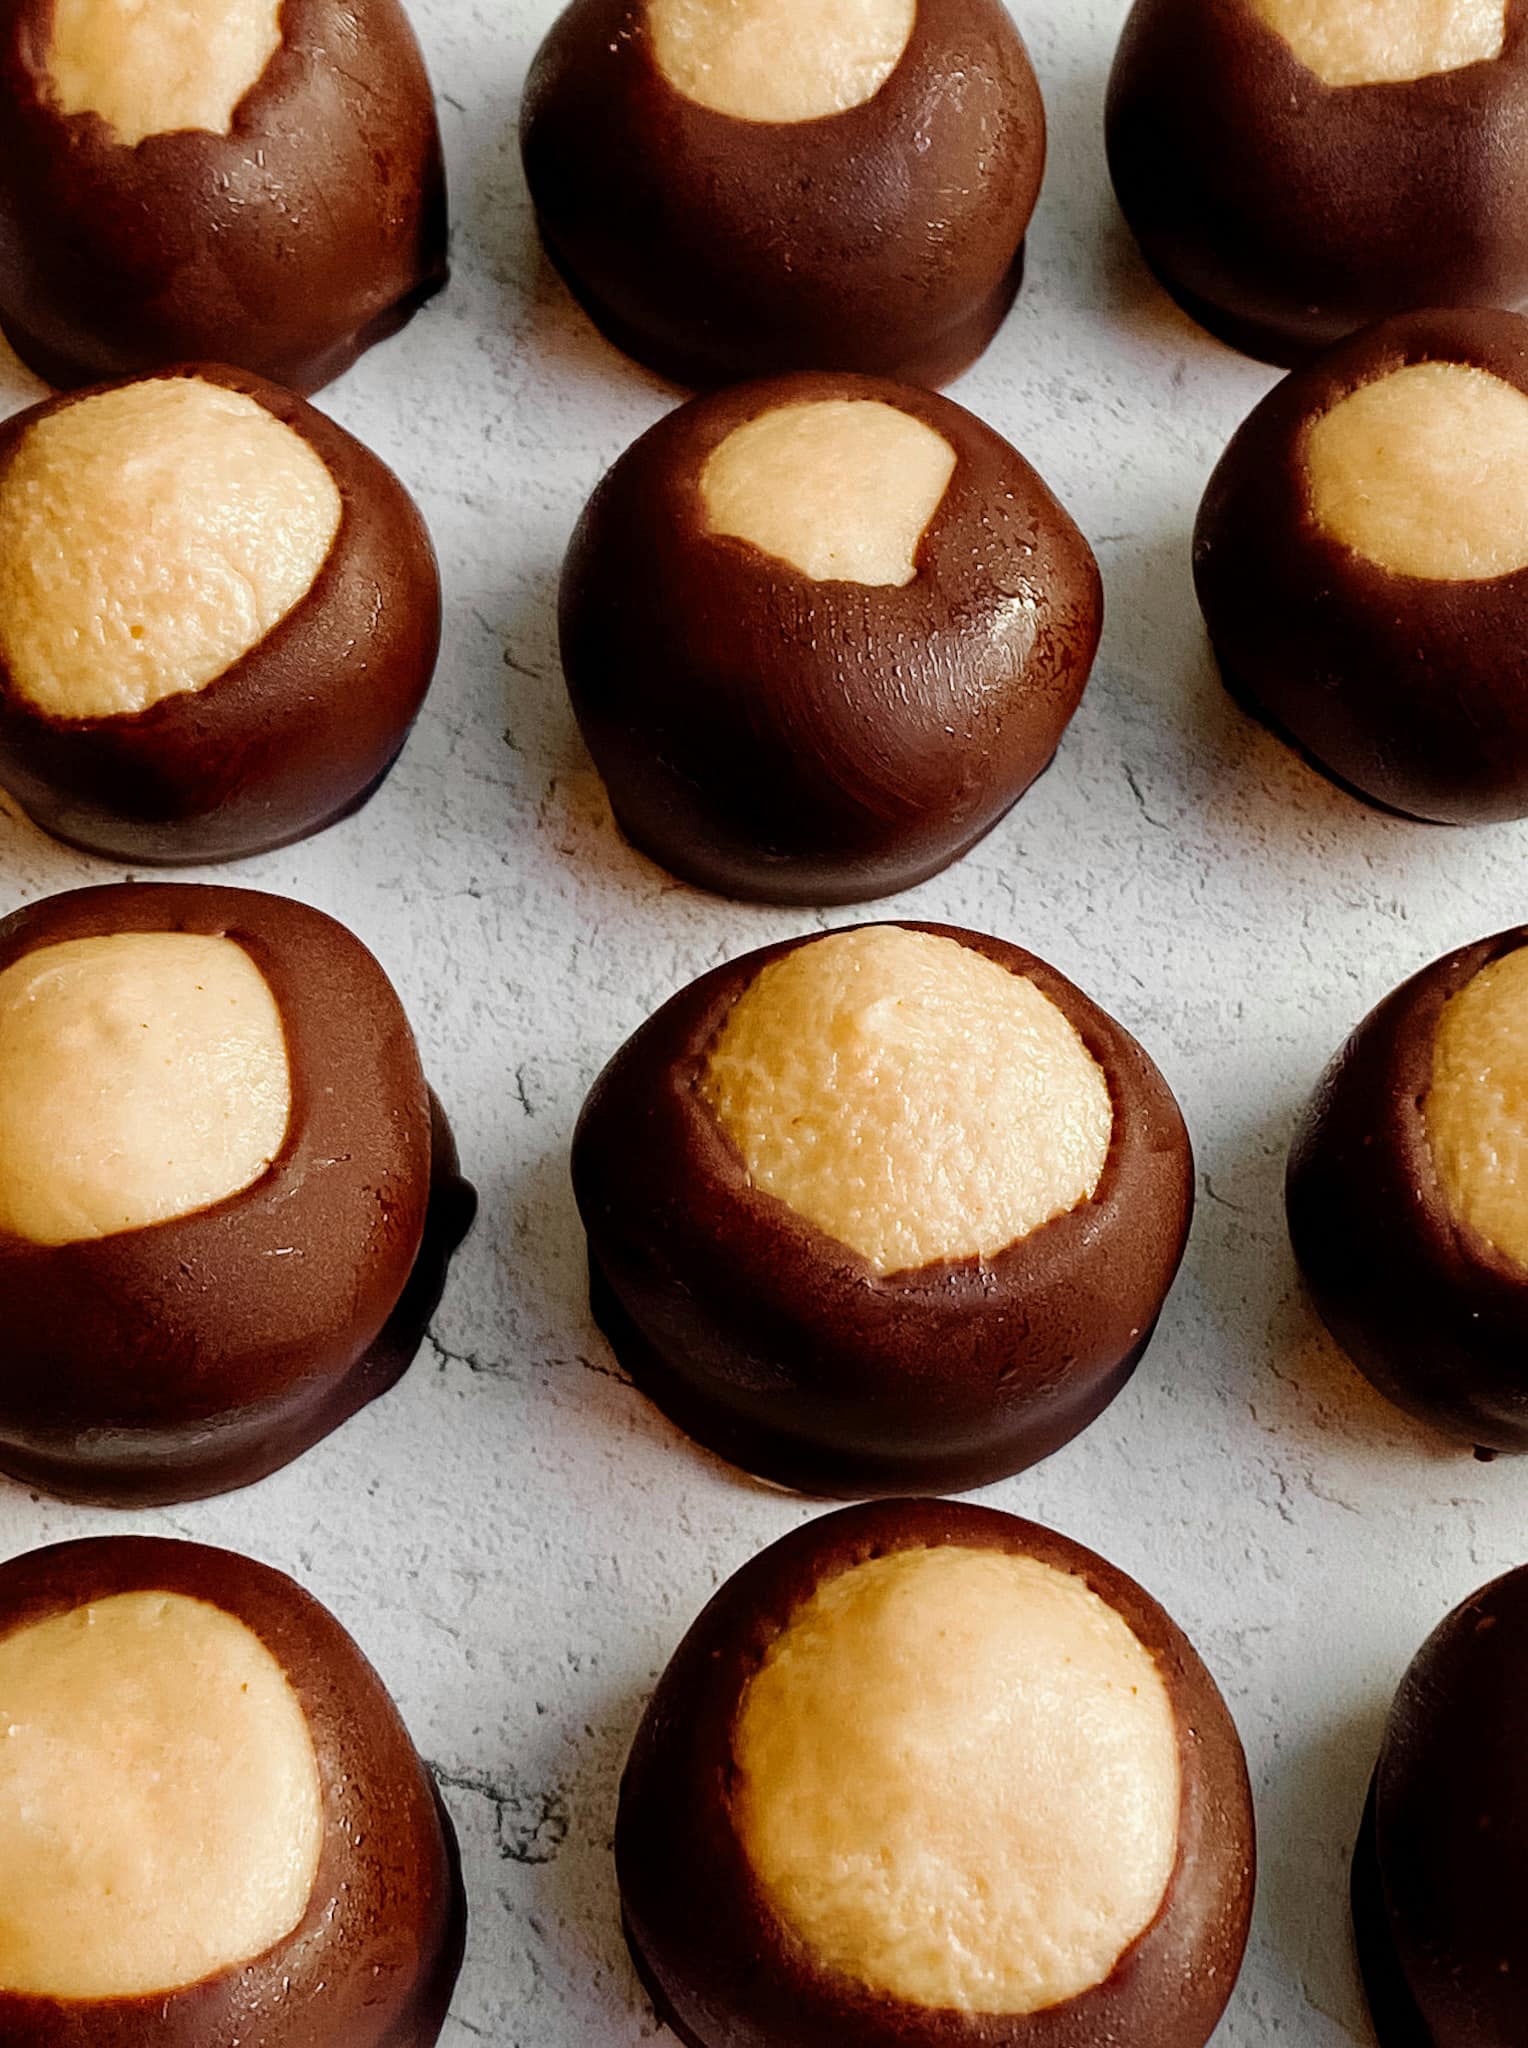 A close up spread of peanut butter buckeyes, a peanut butter center surrounded by chocolate.